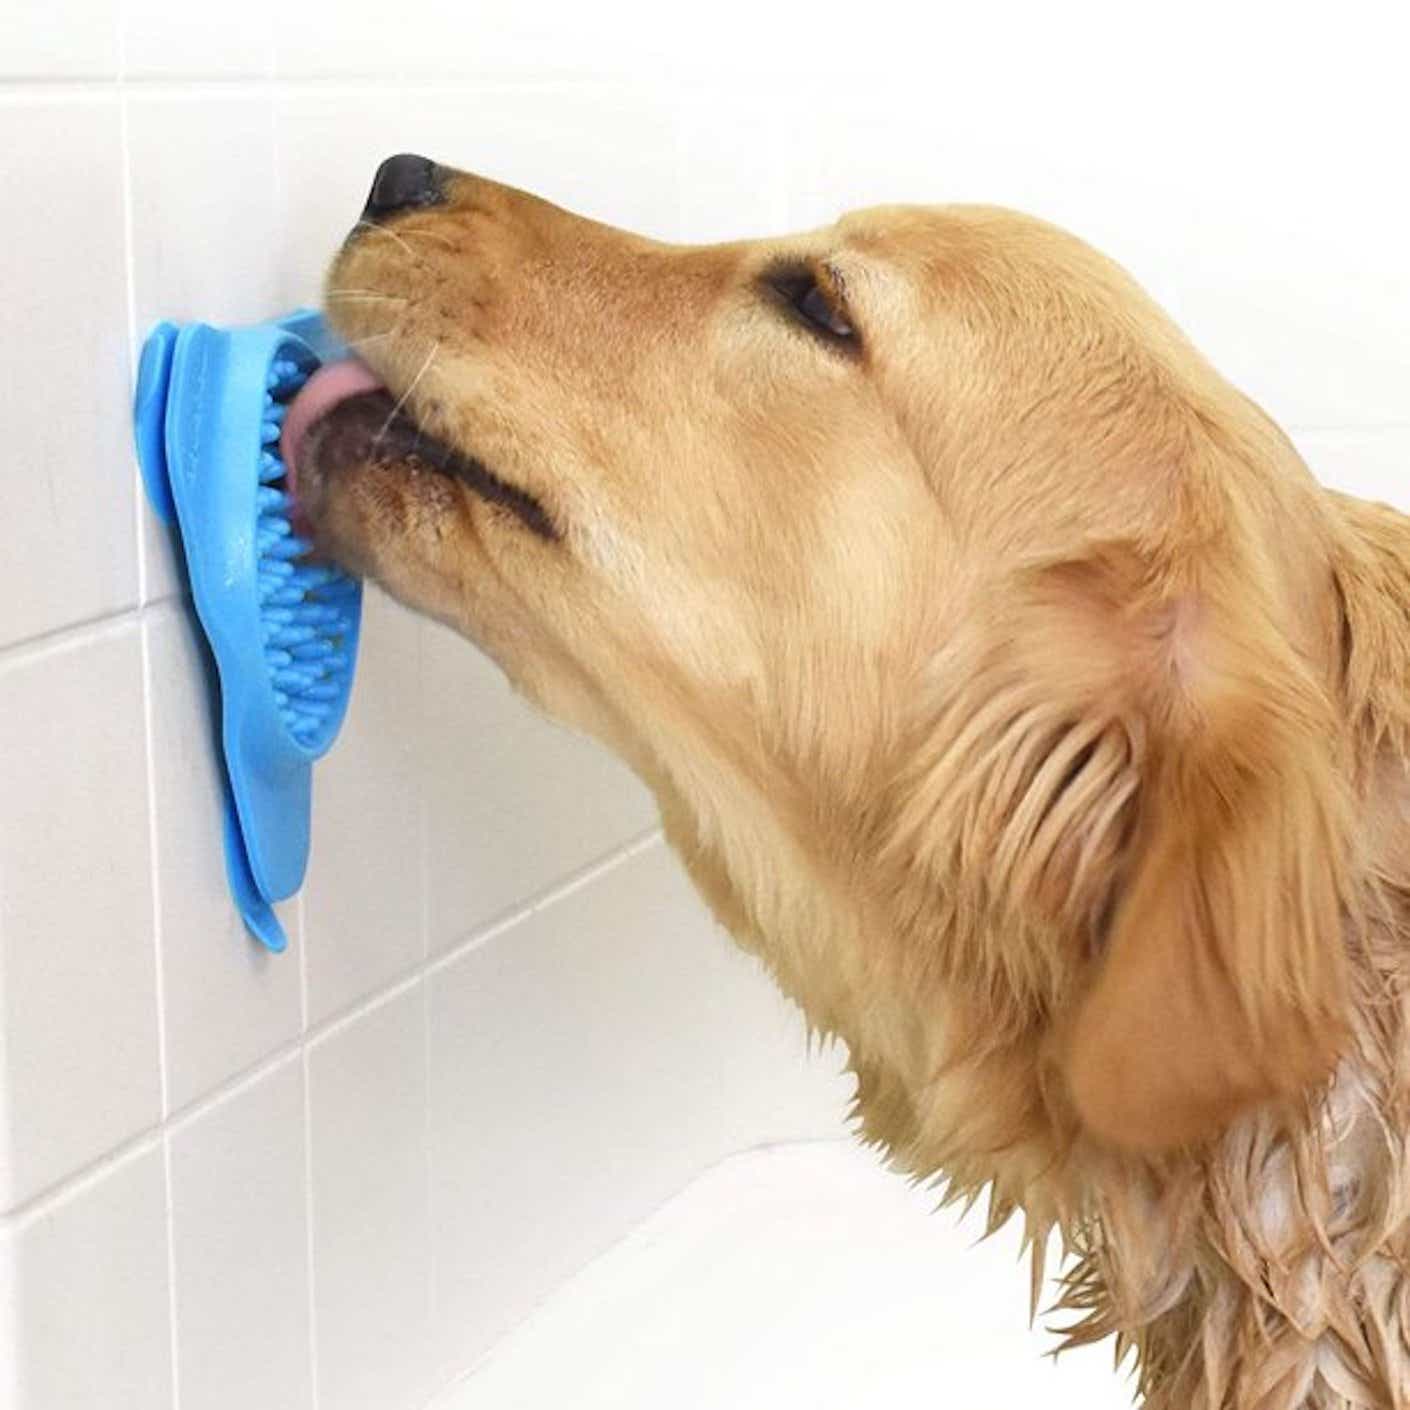 A golden retriever licks a textured, silicone mat that is stuck via suction cups to a tile bathroom wall.